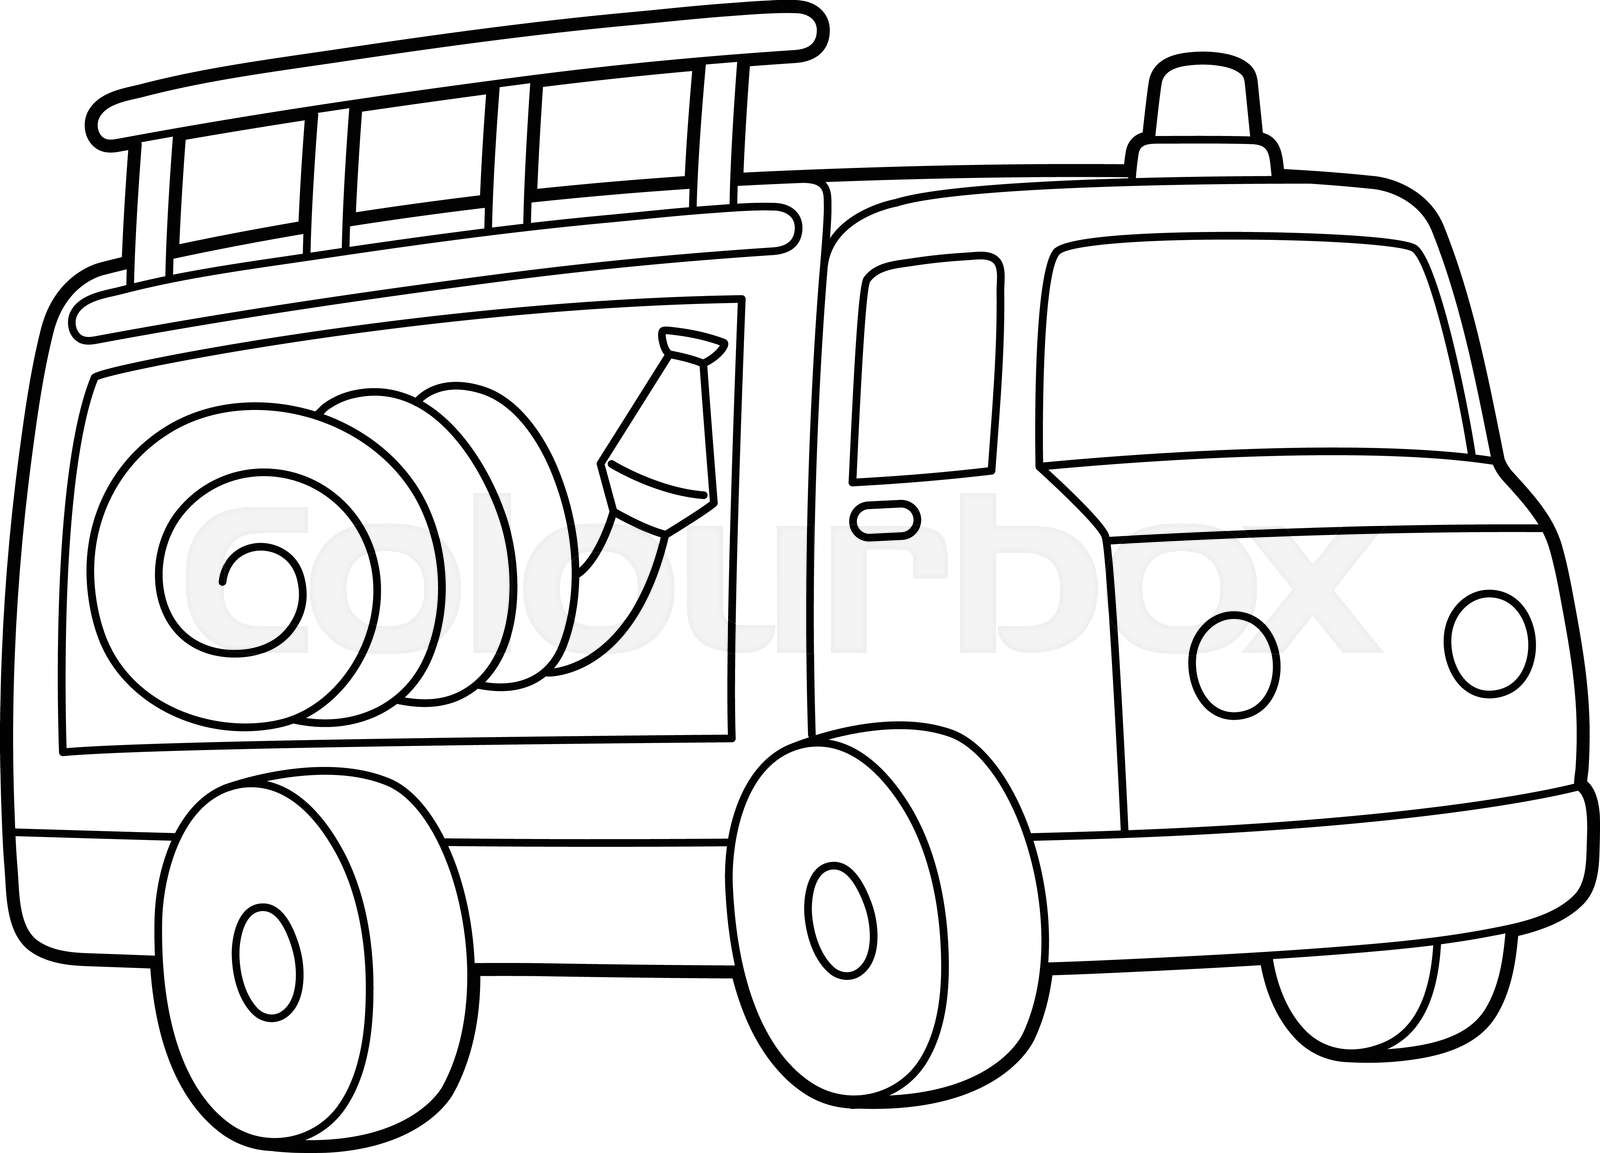 Fire truck coloring page isolated for kids stock vector